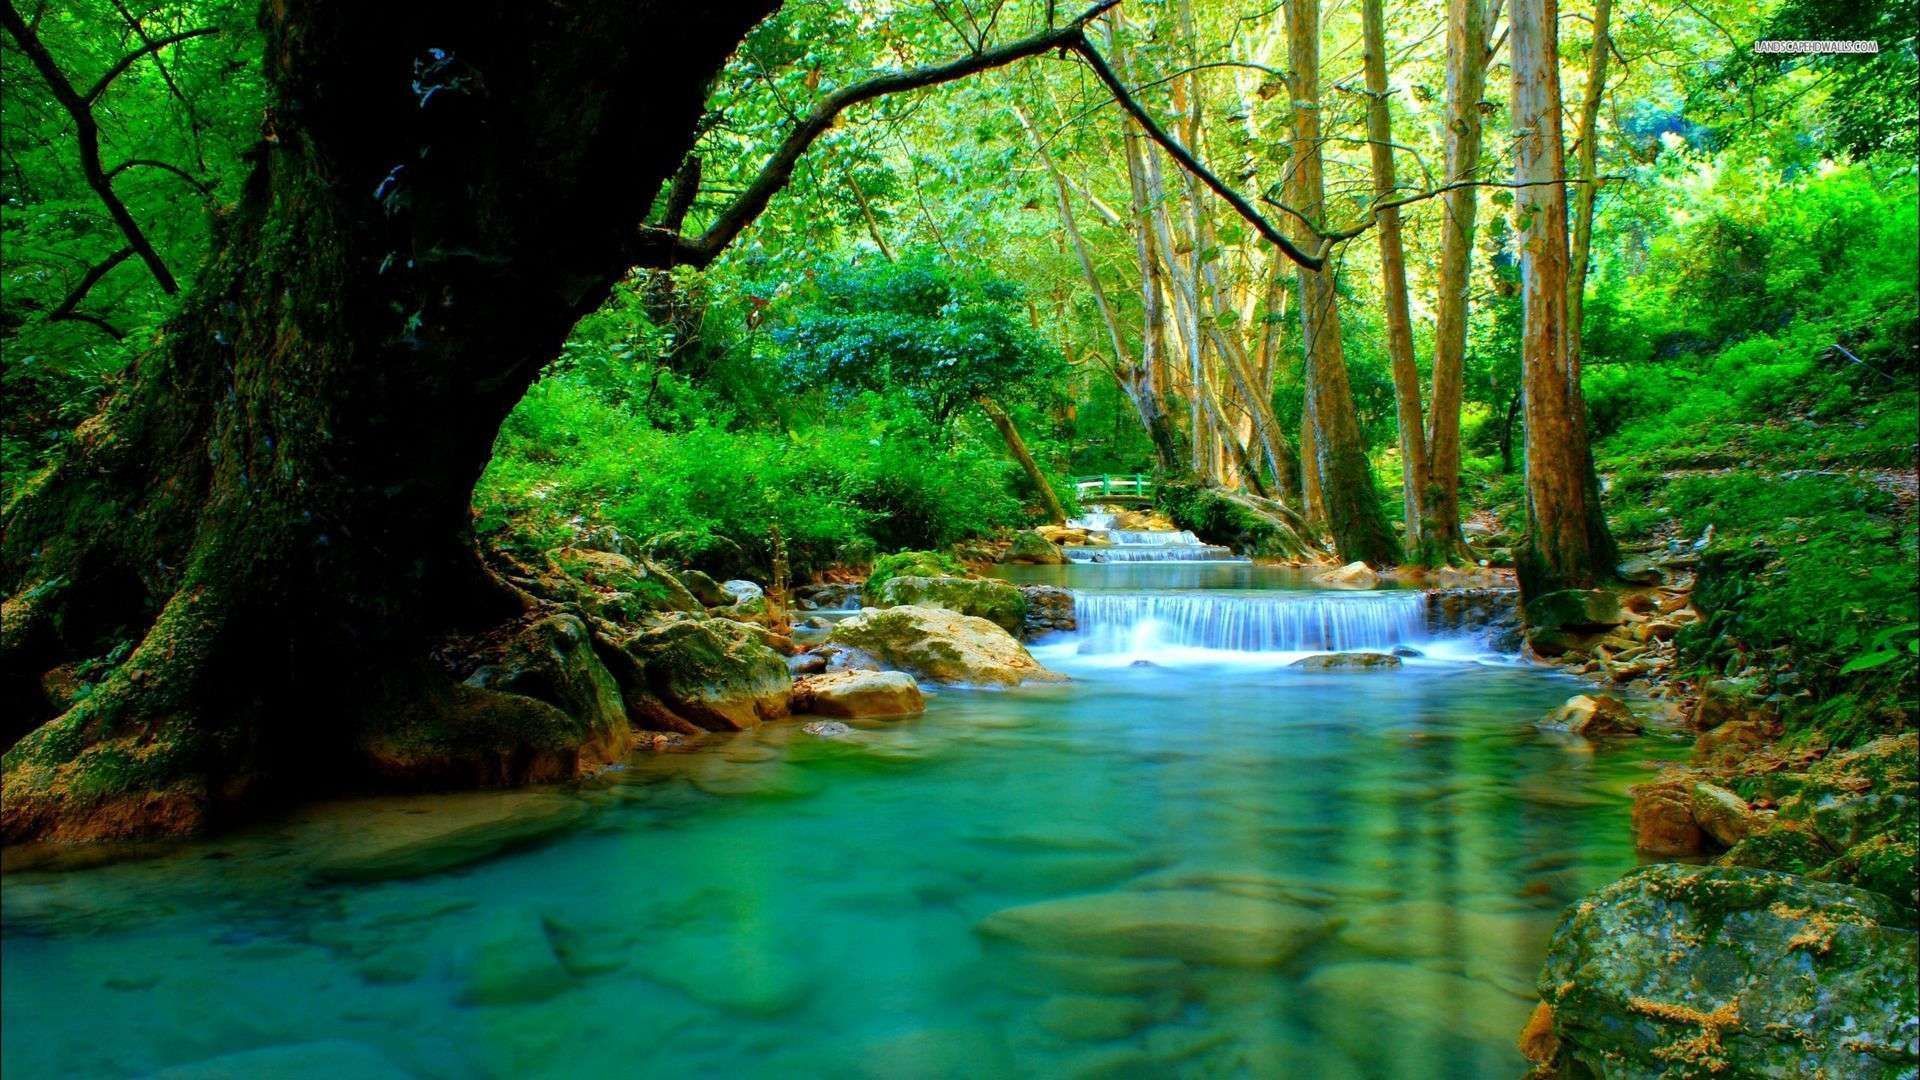 River In The Forest Wallpapers Wallpaper Cave